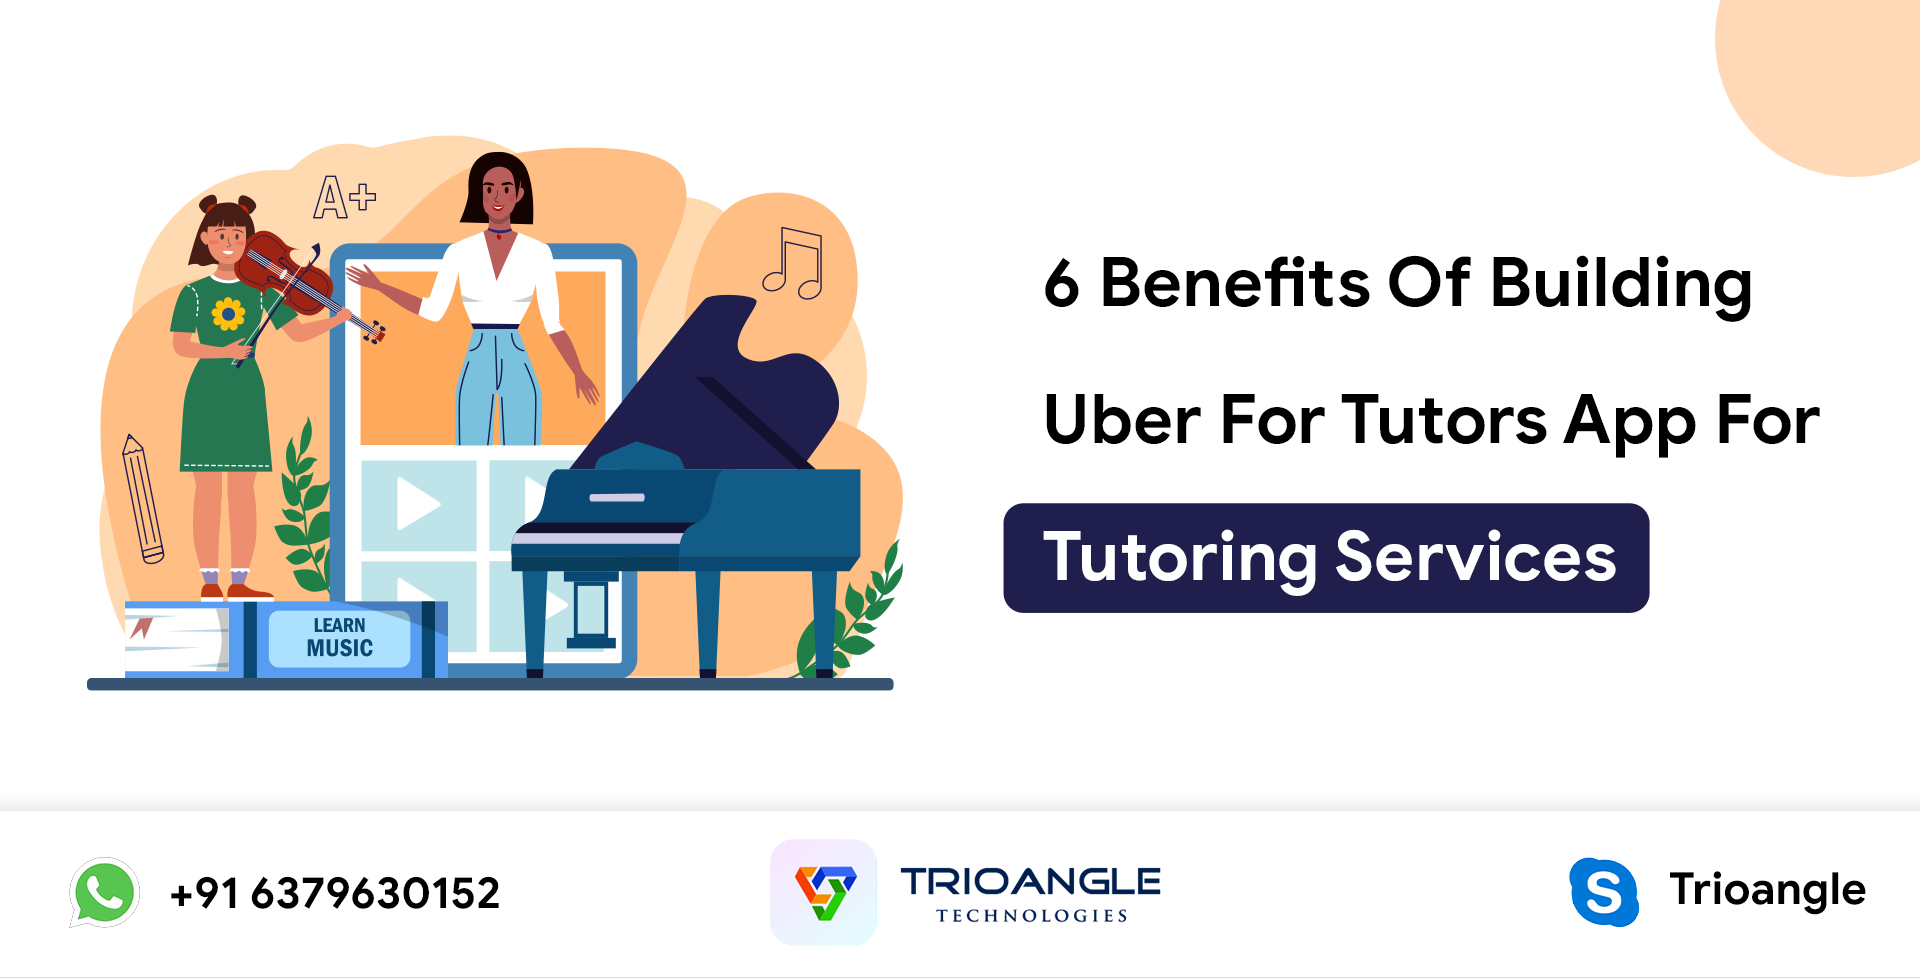 Article about 6 Benefits Of Building Uber For Tutors App For Tutoring Services